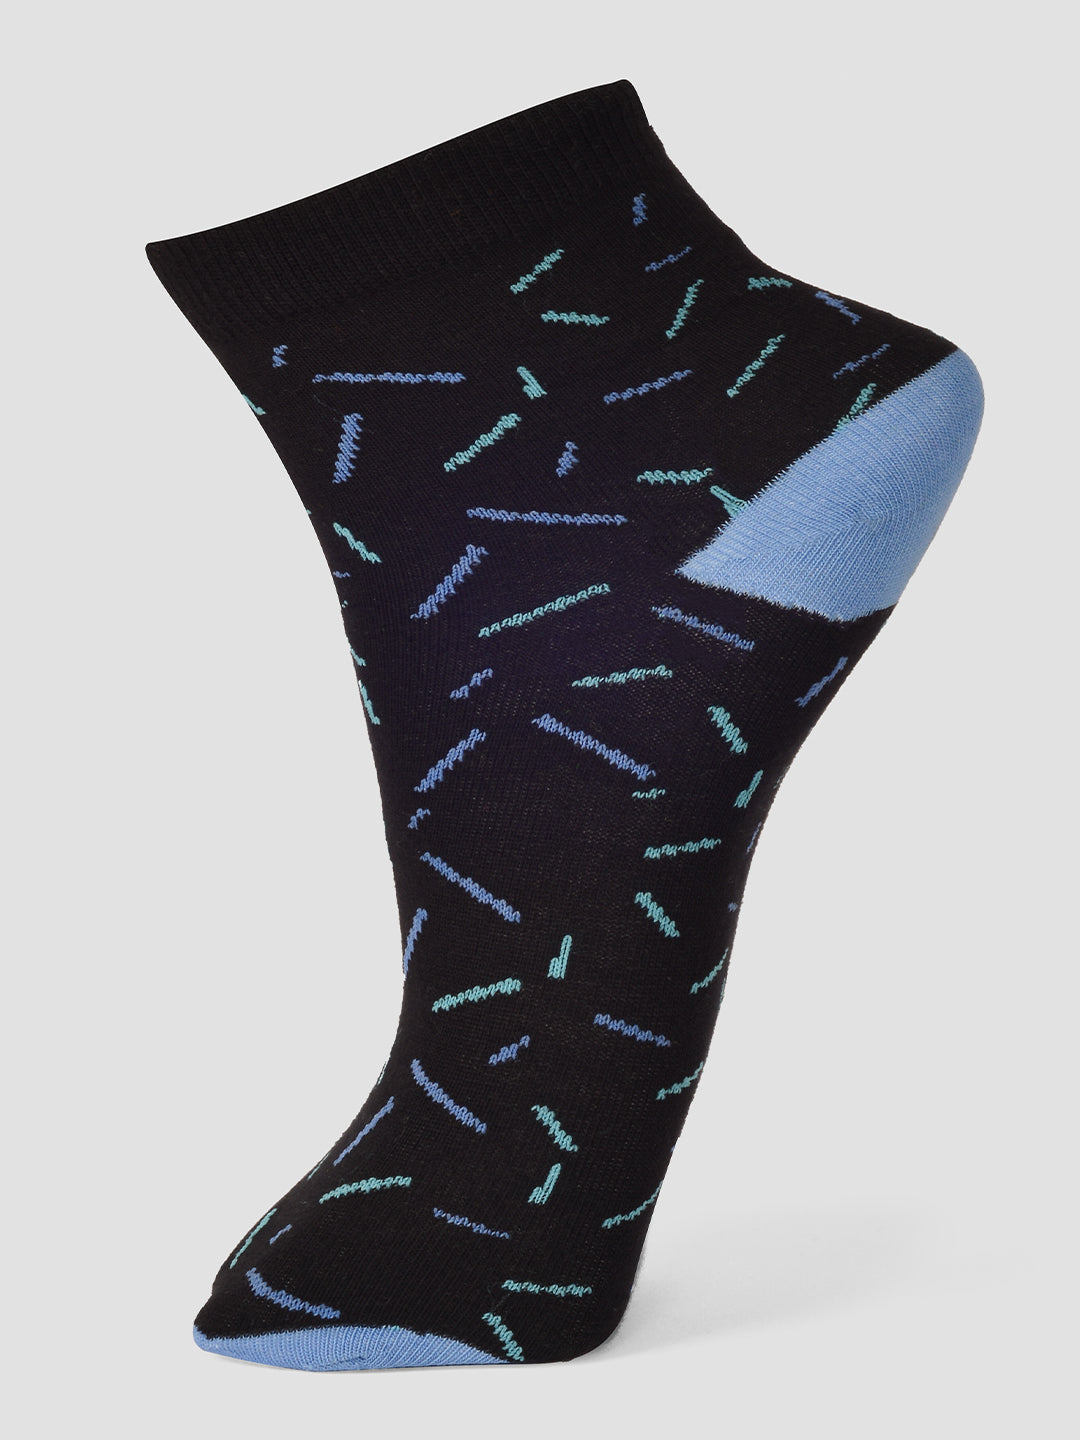 FRENCHIE PO5 GEOMETRIC ALL OVER DESIGN ANKLE LENGTH CUT ASSORTED COTTON SOCKS 01